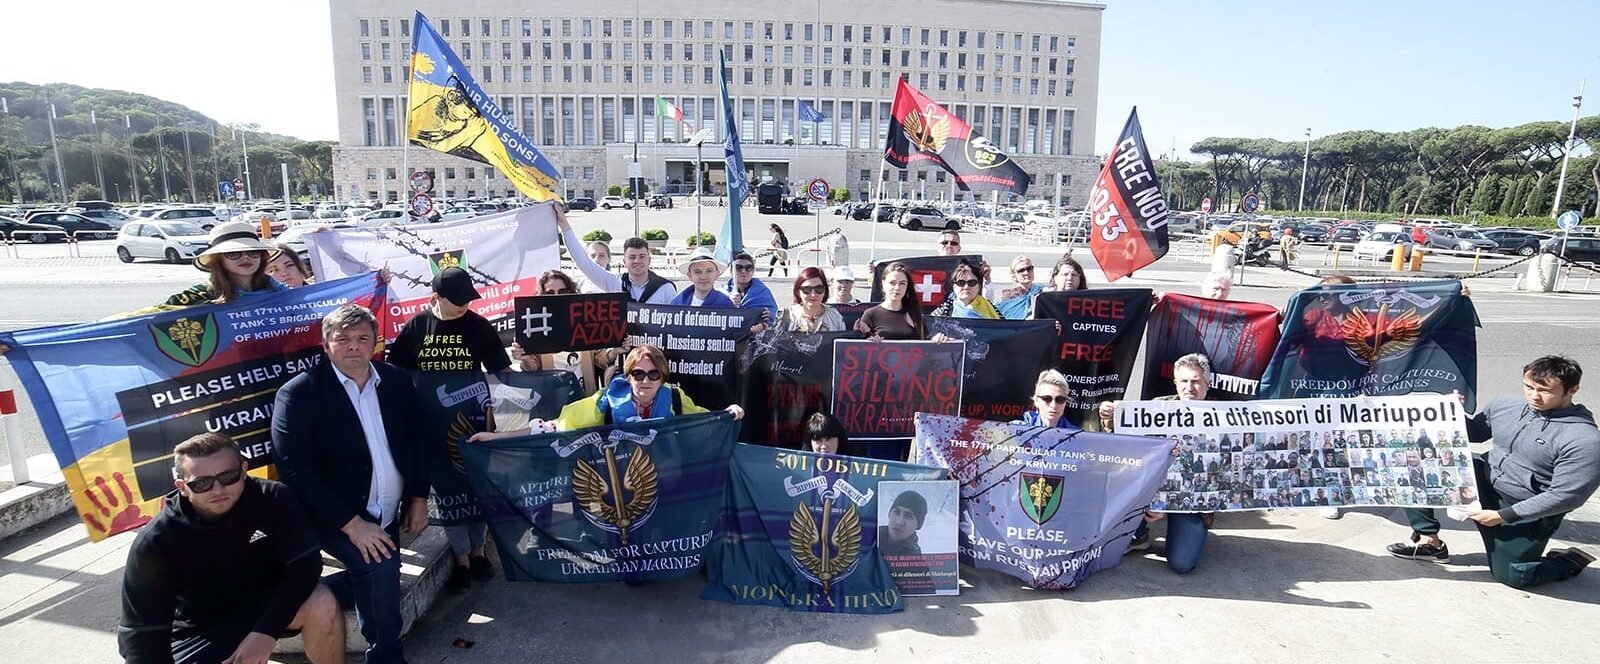 Ukrainians in Italy call on authorities to help free Mariupol defenders